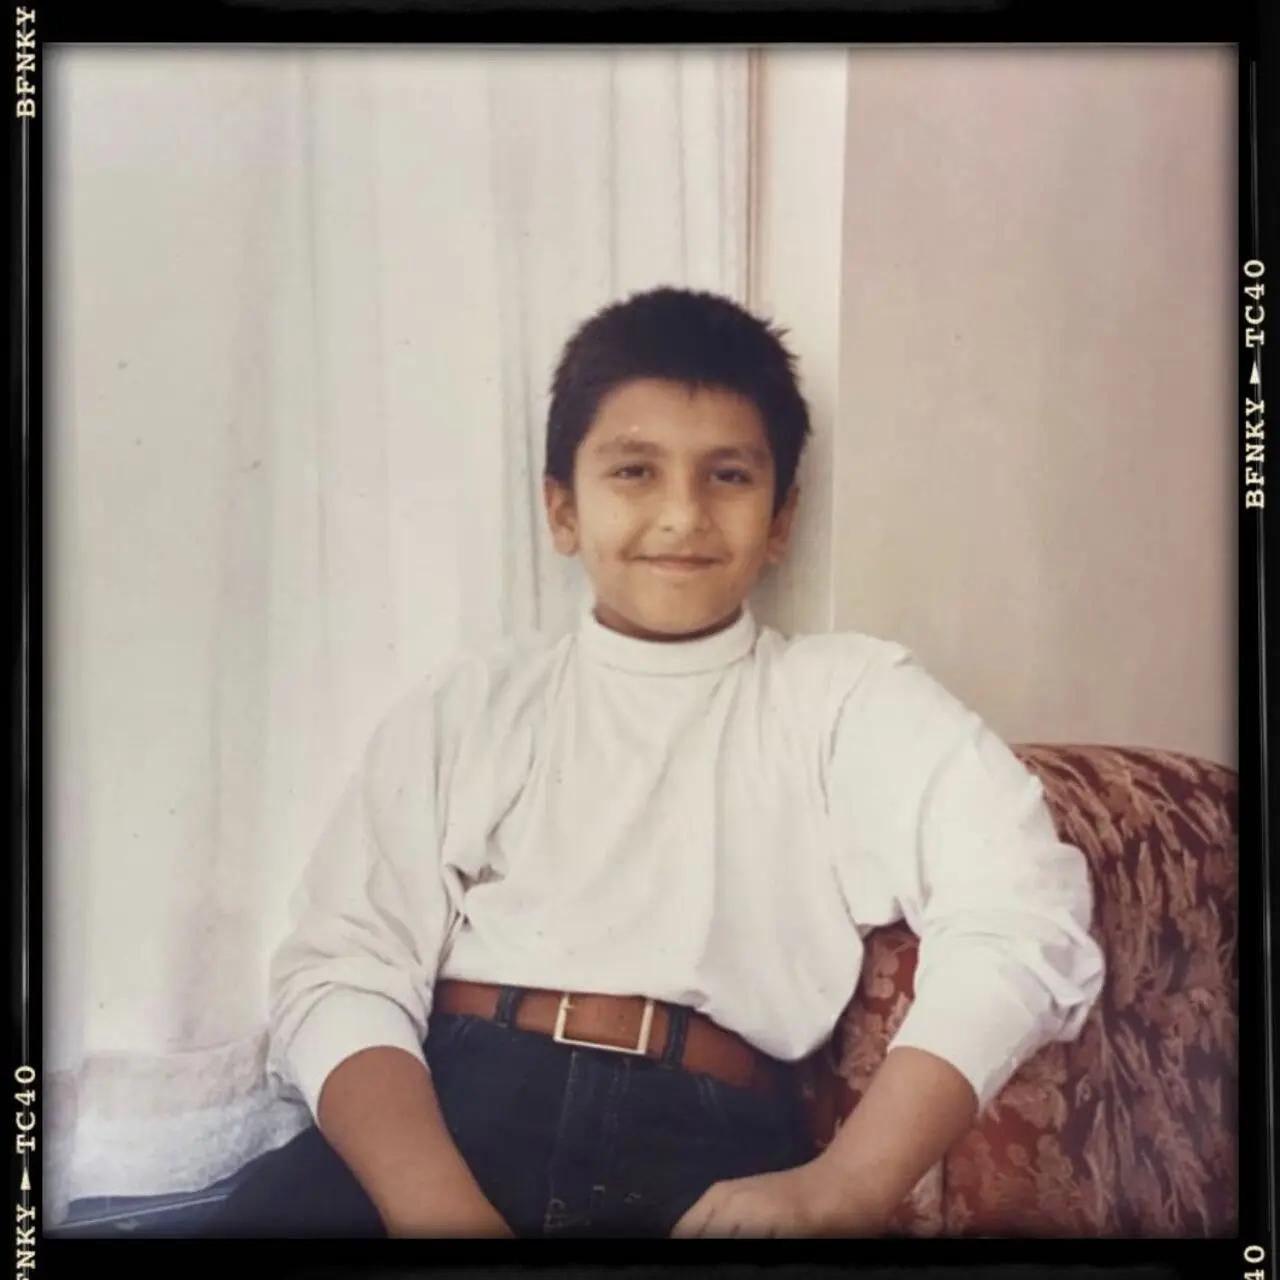 Ranveer Singh looks like a fashionista even as a child. Thank god he hasn't ditched his style